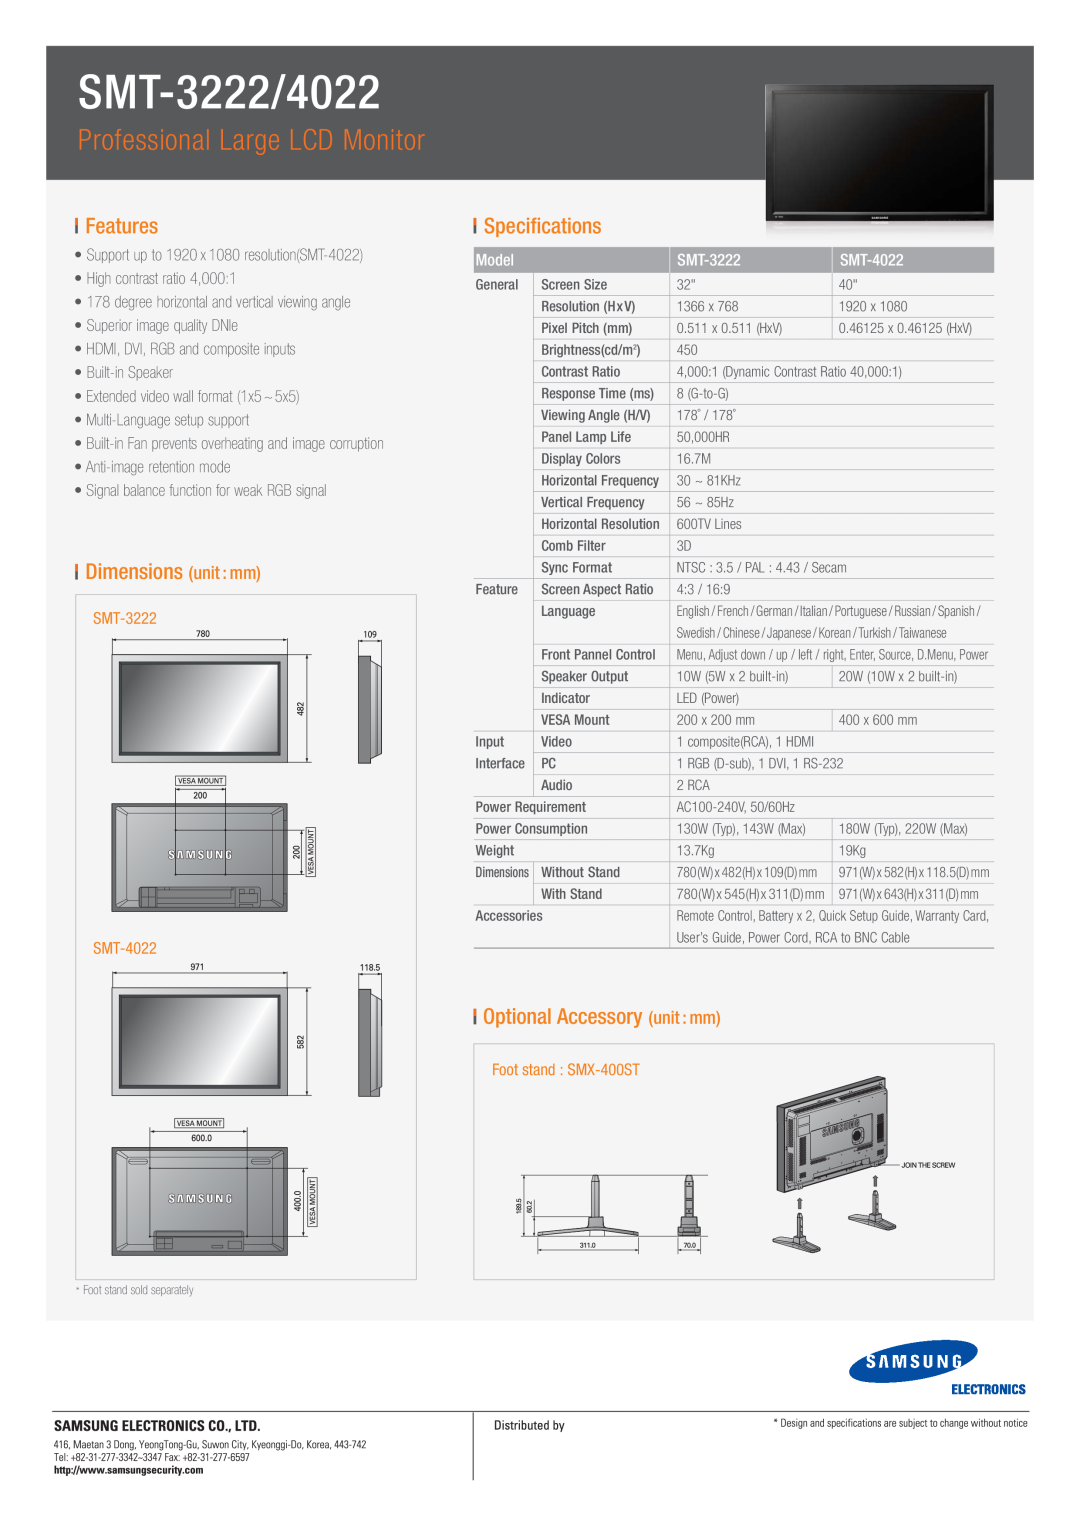 Samsung SMT-3222/4022, Professional Large LCD Monitor, Features, Dimensions unit mm, Specifications, Model, SMT-4022 